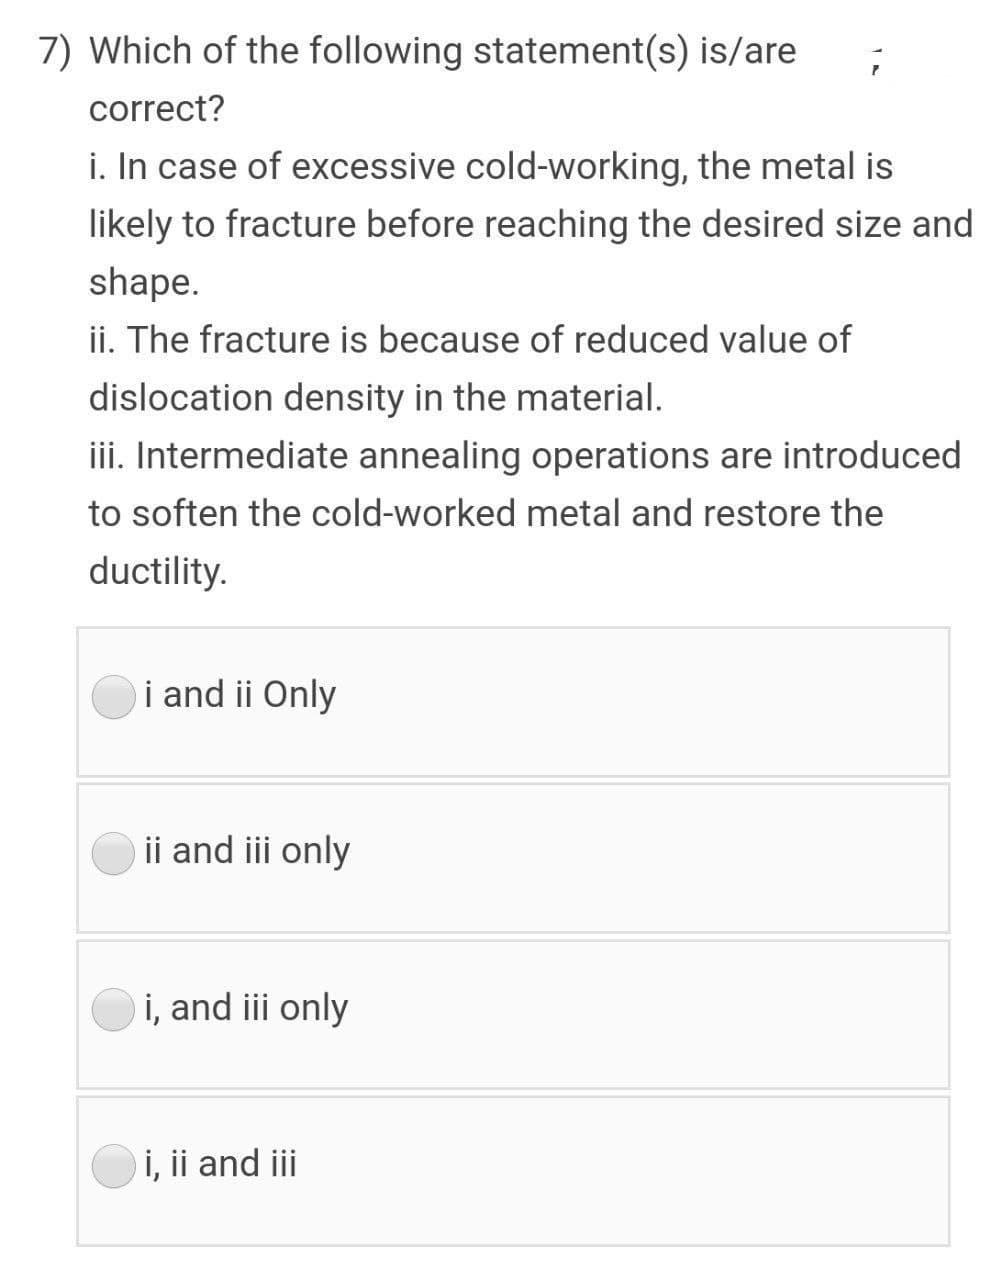 7) Which of the following statement(s) is/are
correct?
i. In case of excessive cold-working, the metal is
likely to fracture before reaching the desired size and
shape.
ii. The fracture is because of reduced value of
dislocation density in the material.
iii. Intermediate annealing operations are introduced
to soften the cold-worked metal and restore the
ductility.
i and ii Only
ii and iii only
i, and iii only
i, ii and iii
